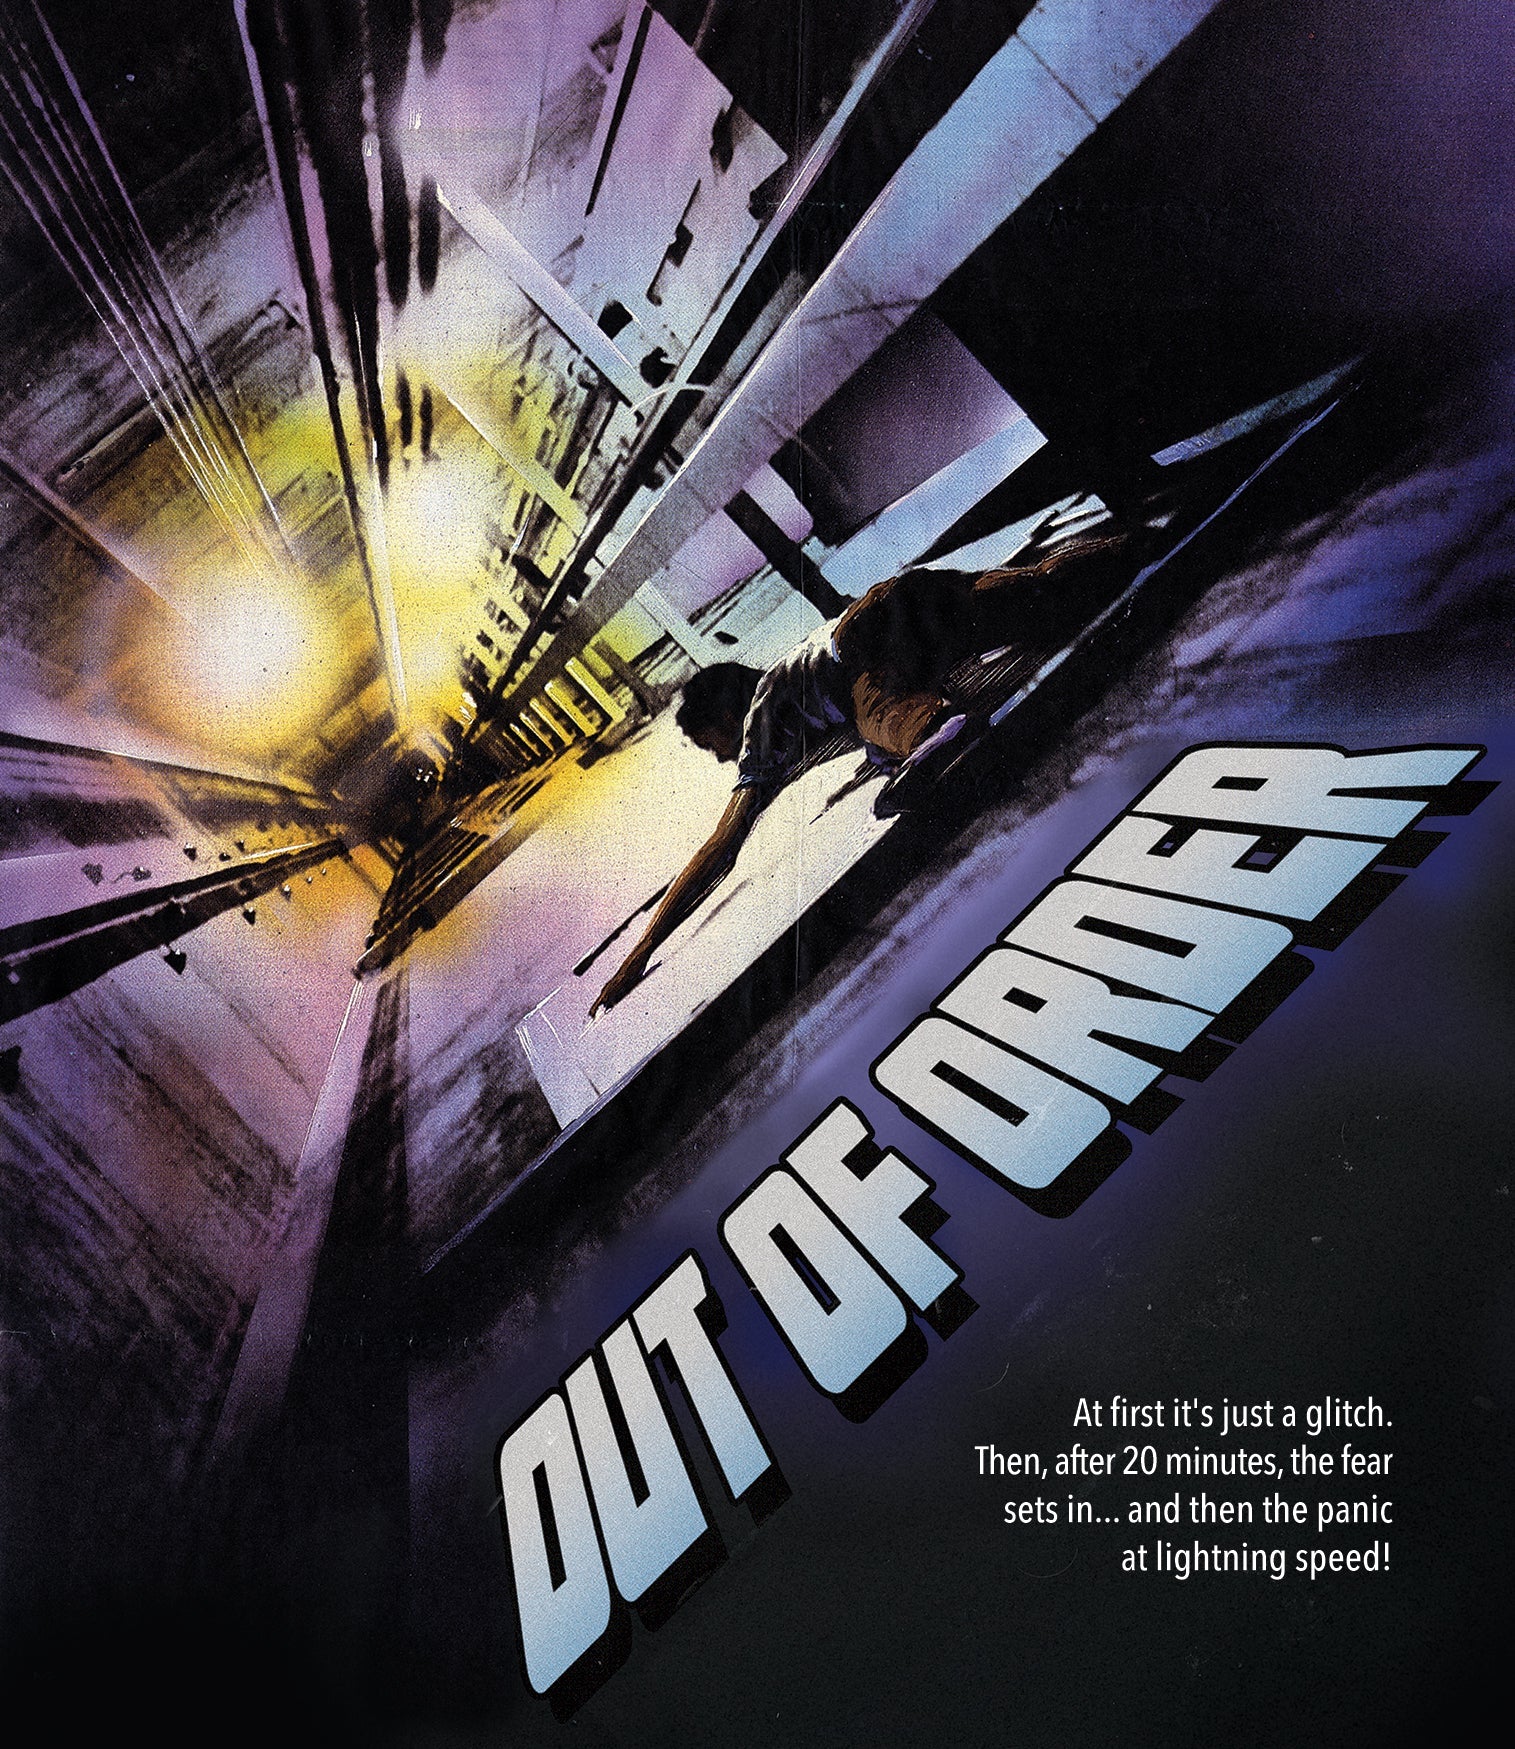 OUT OF ORDER (LIMITED EDITION) 4K UHD/BLU-RAY